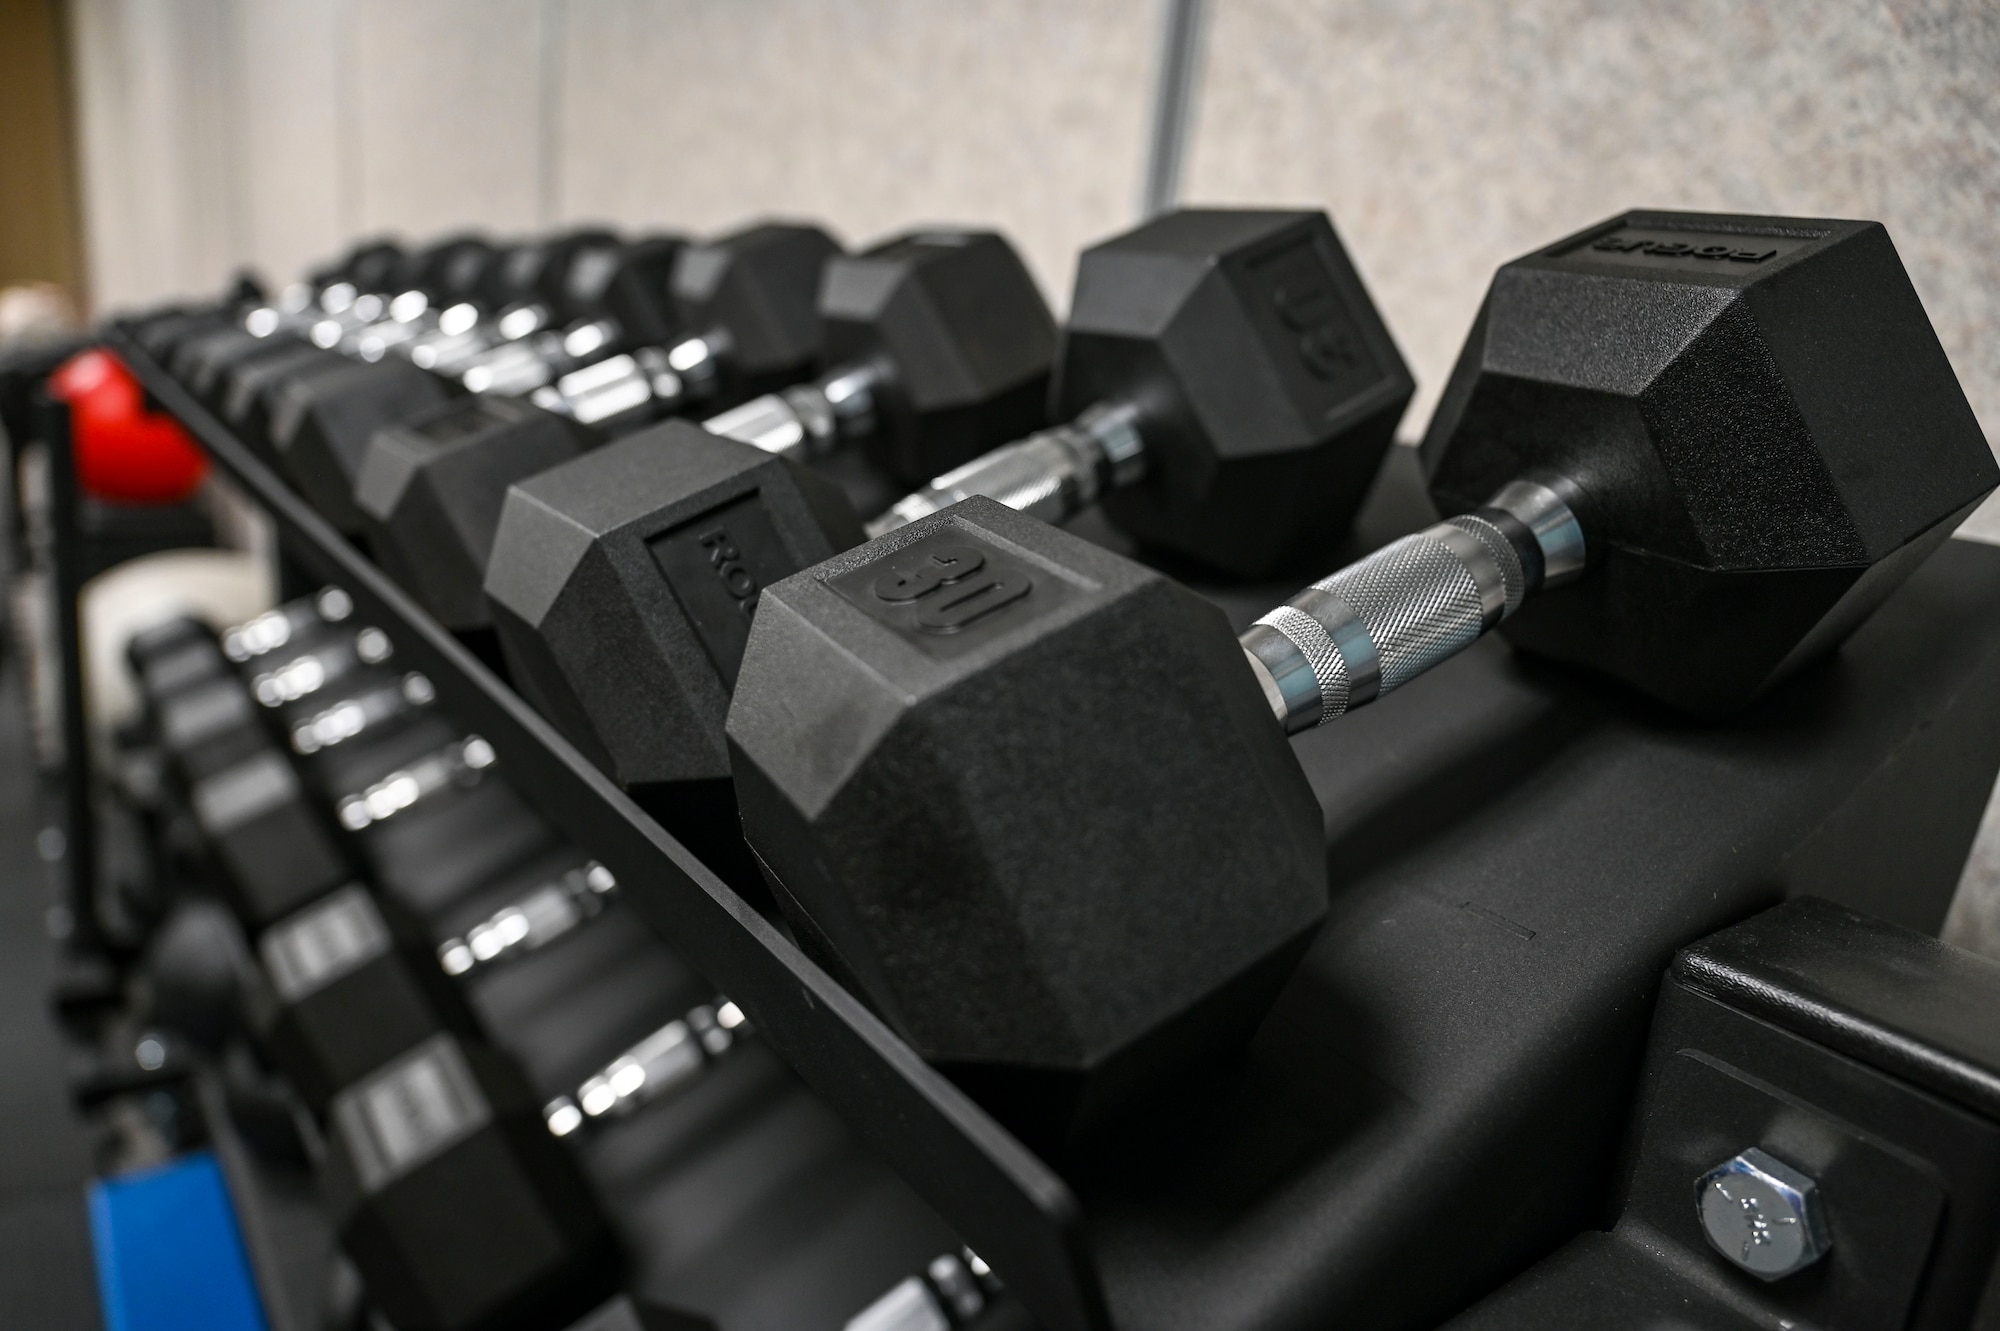 A dumbbell rack is shown